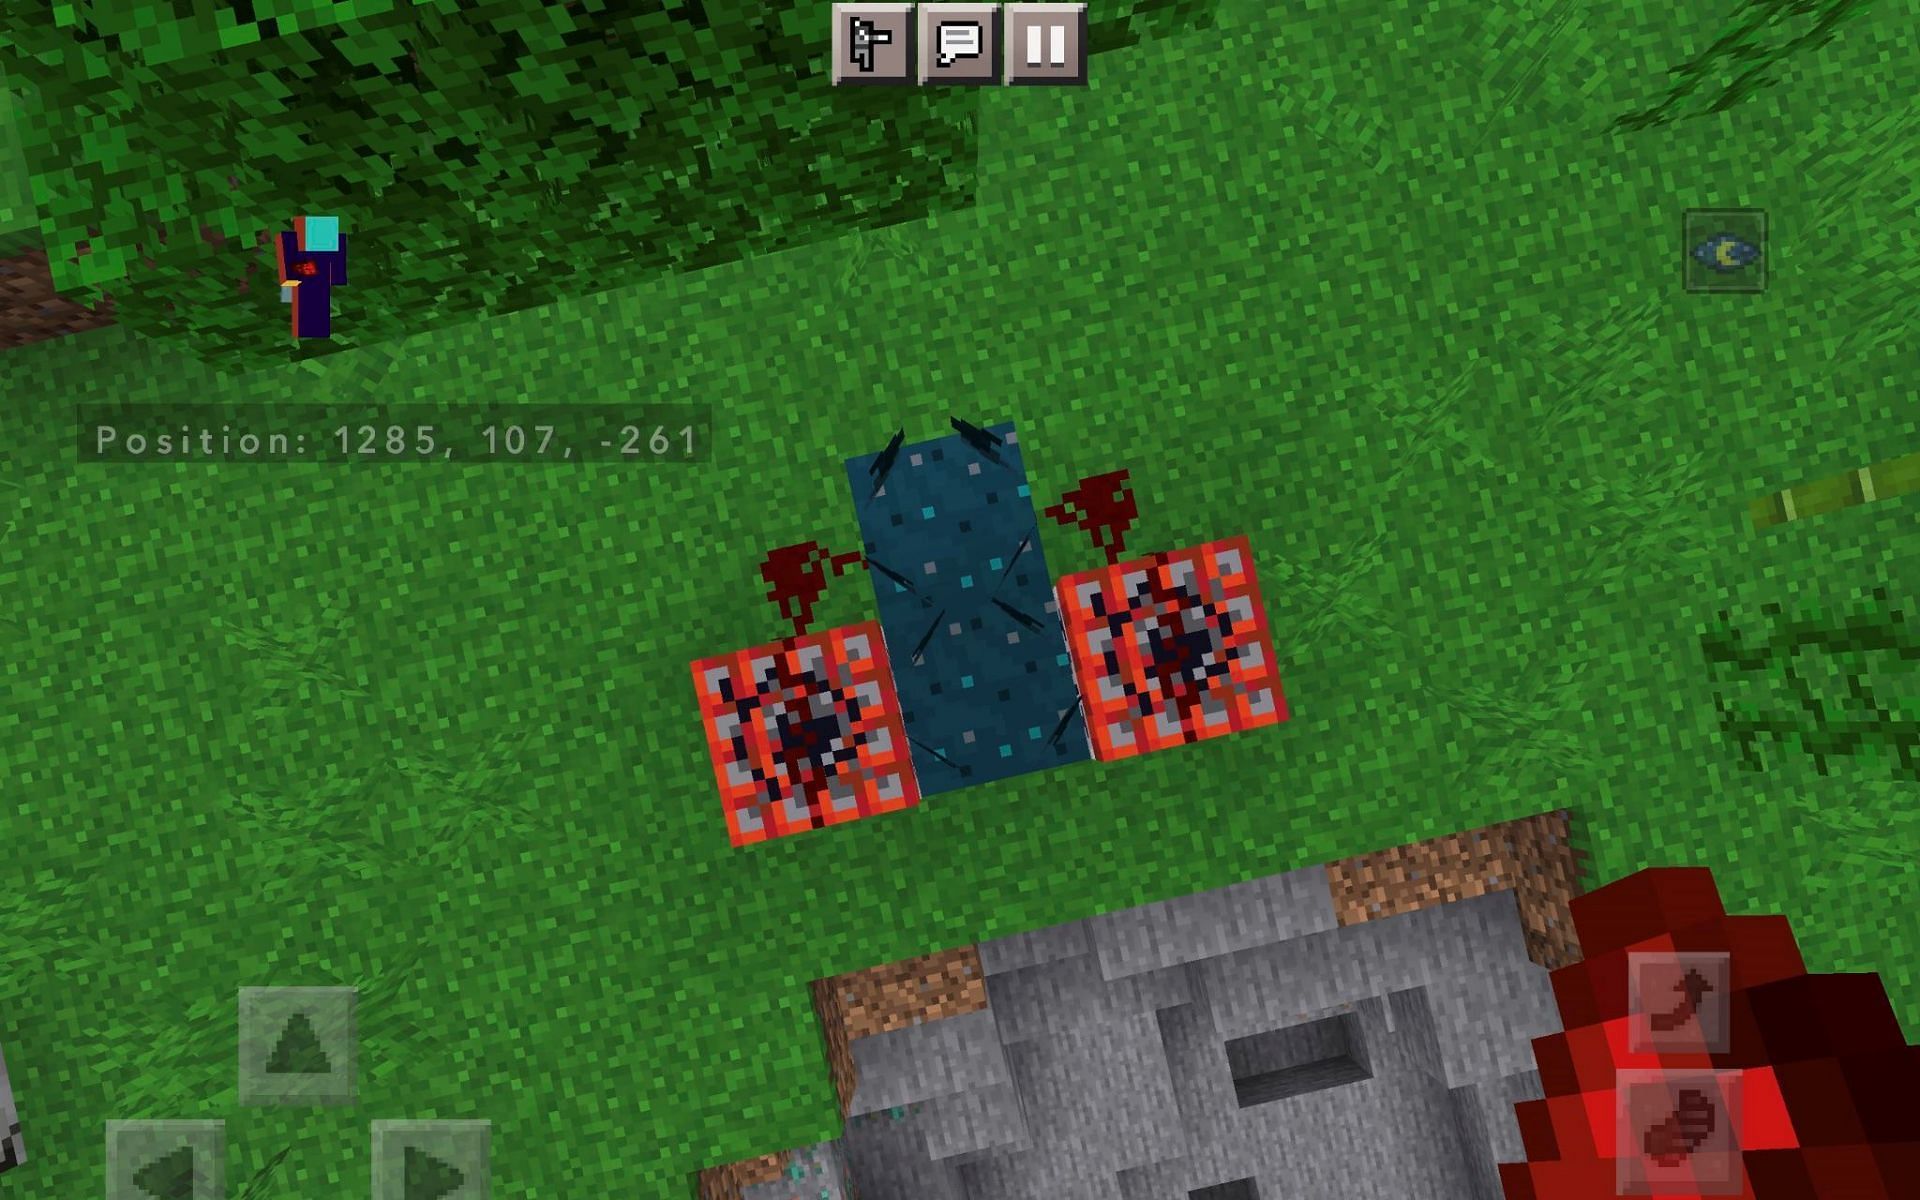 This TNT and sculk sensor bomb is extremely difficult to defuse in Minecraft 1.19 (Image via u/maxiface Reddit)